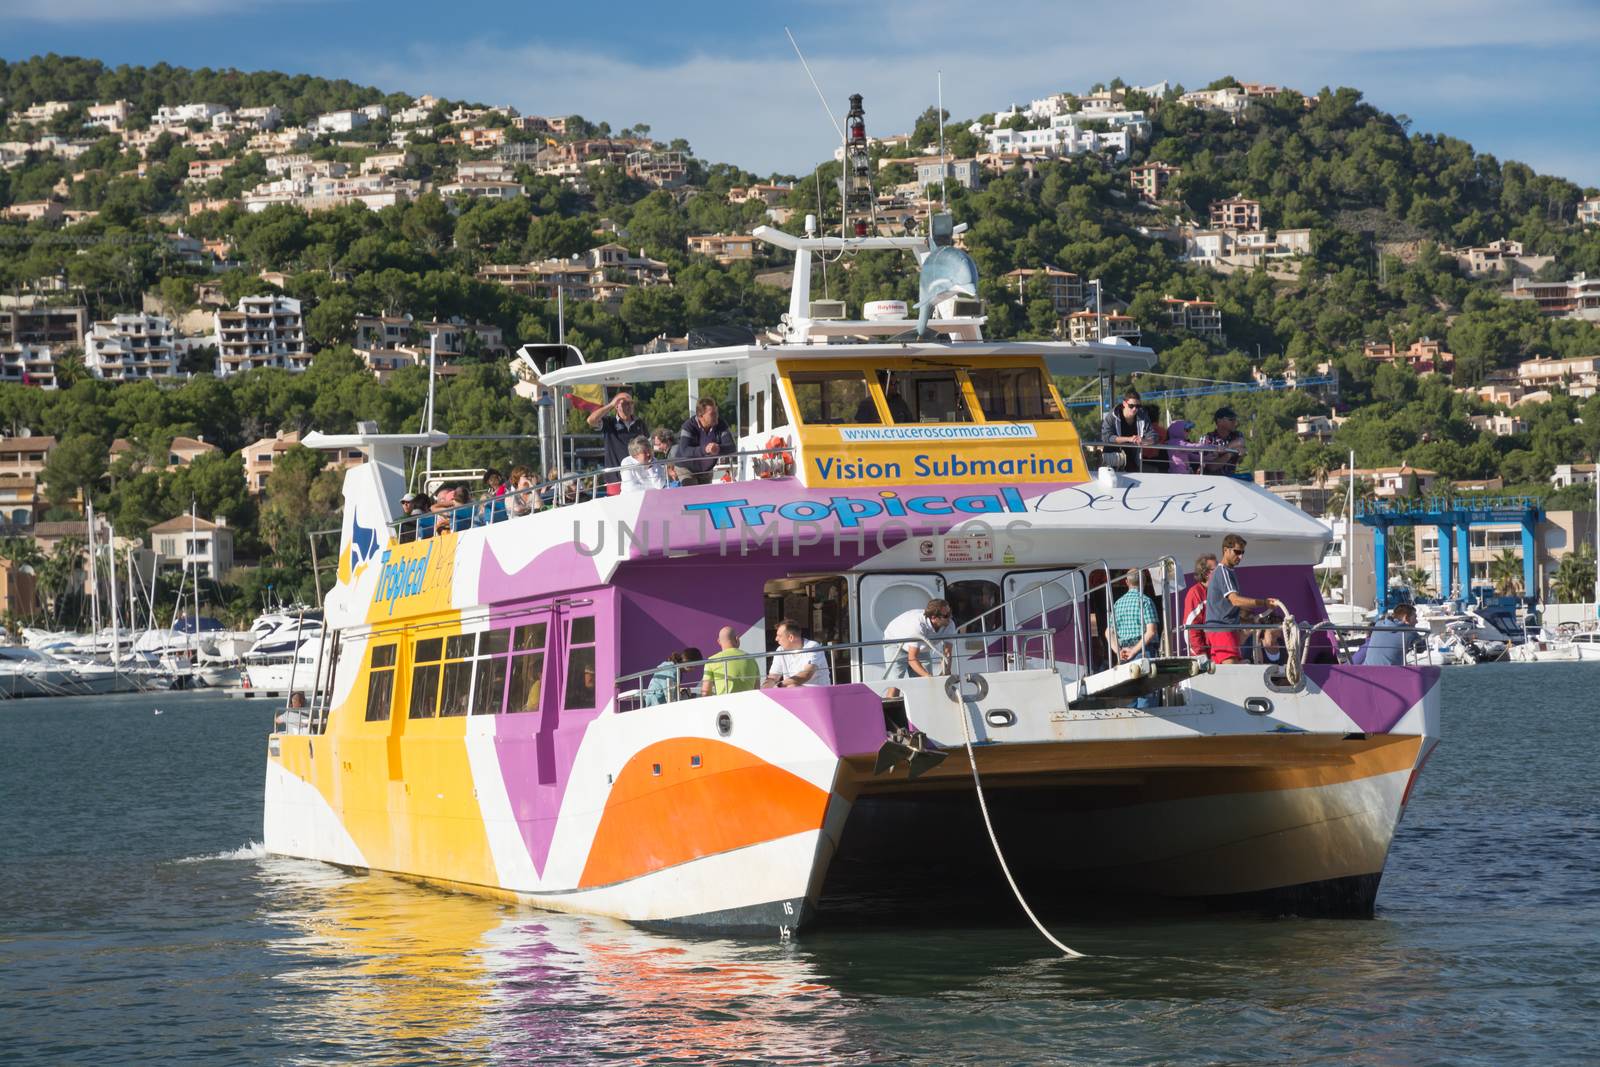 Glass bottom boat, a popular tourist attraction, arriving back in Puerto Andratx after a tour at sea.